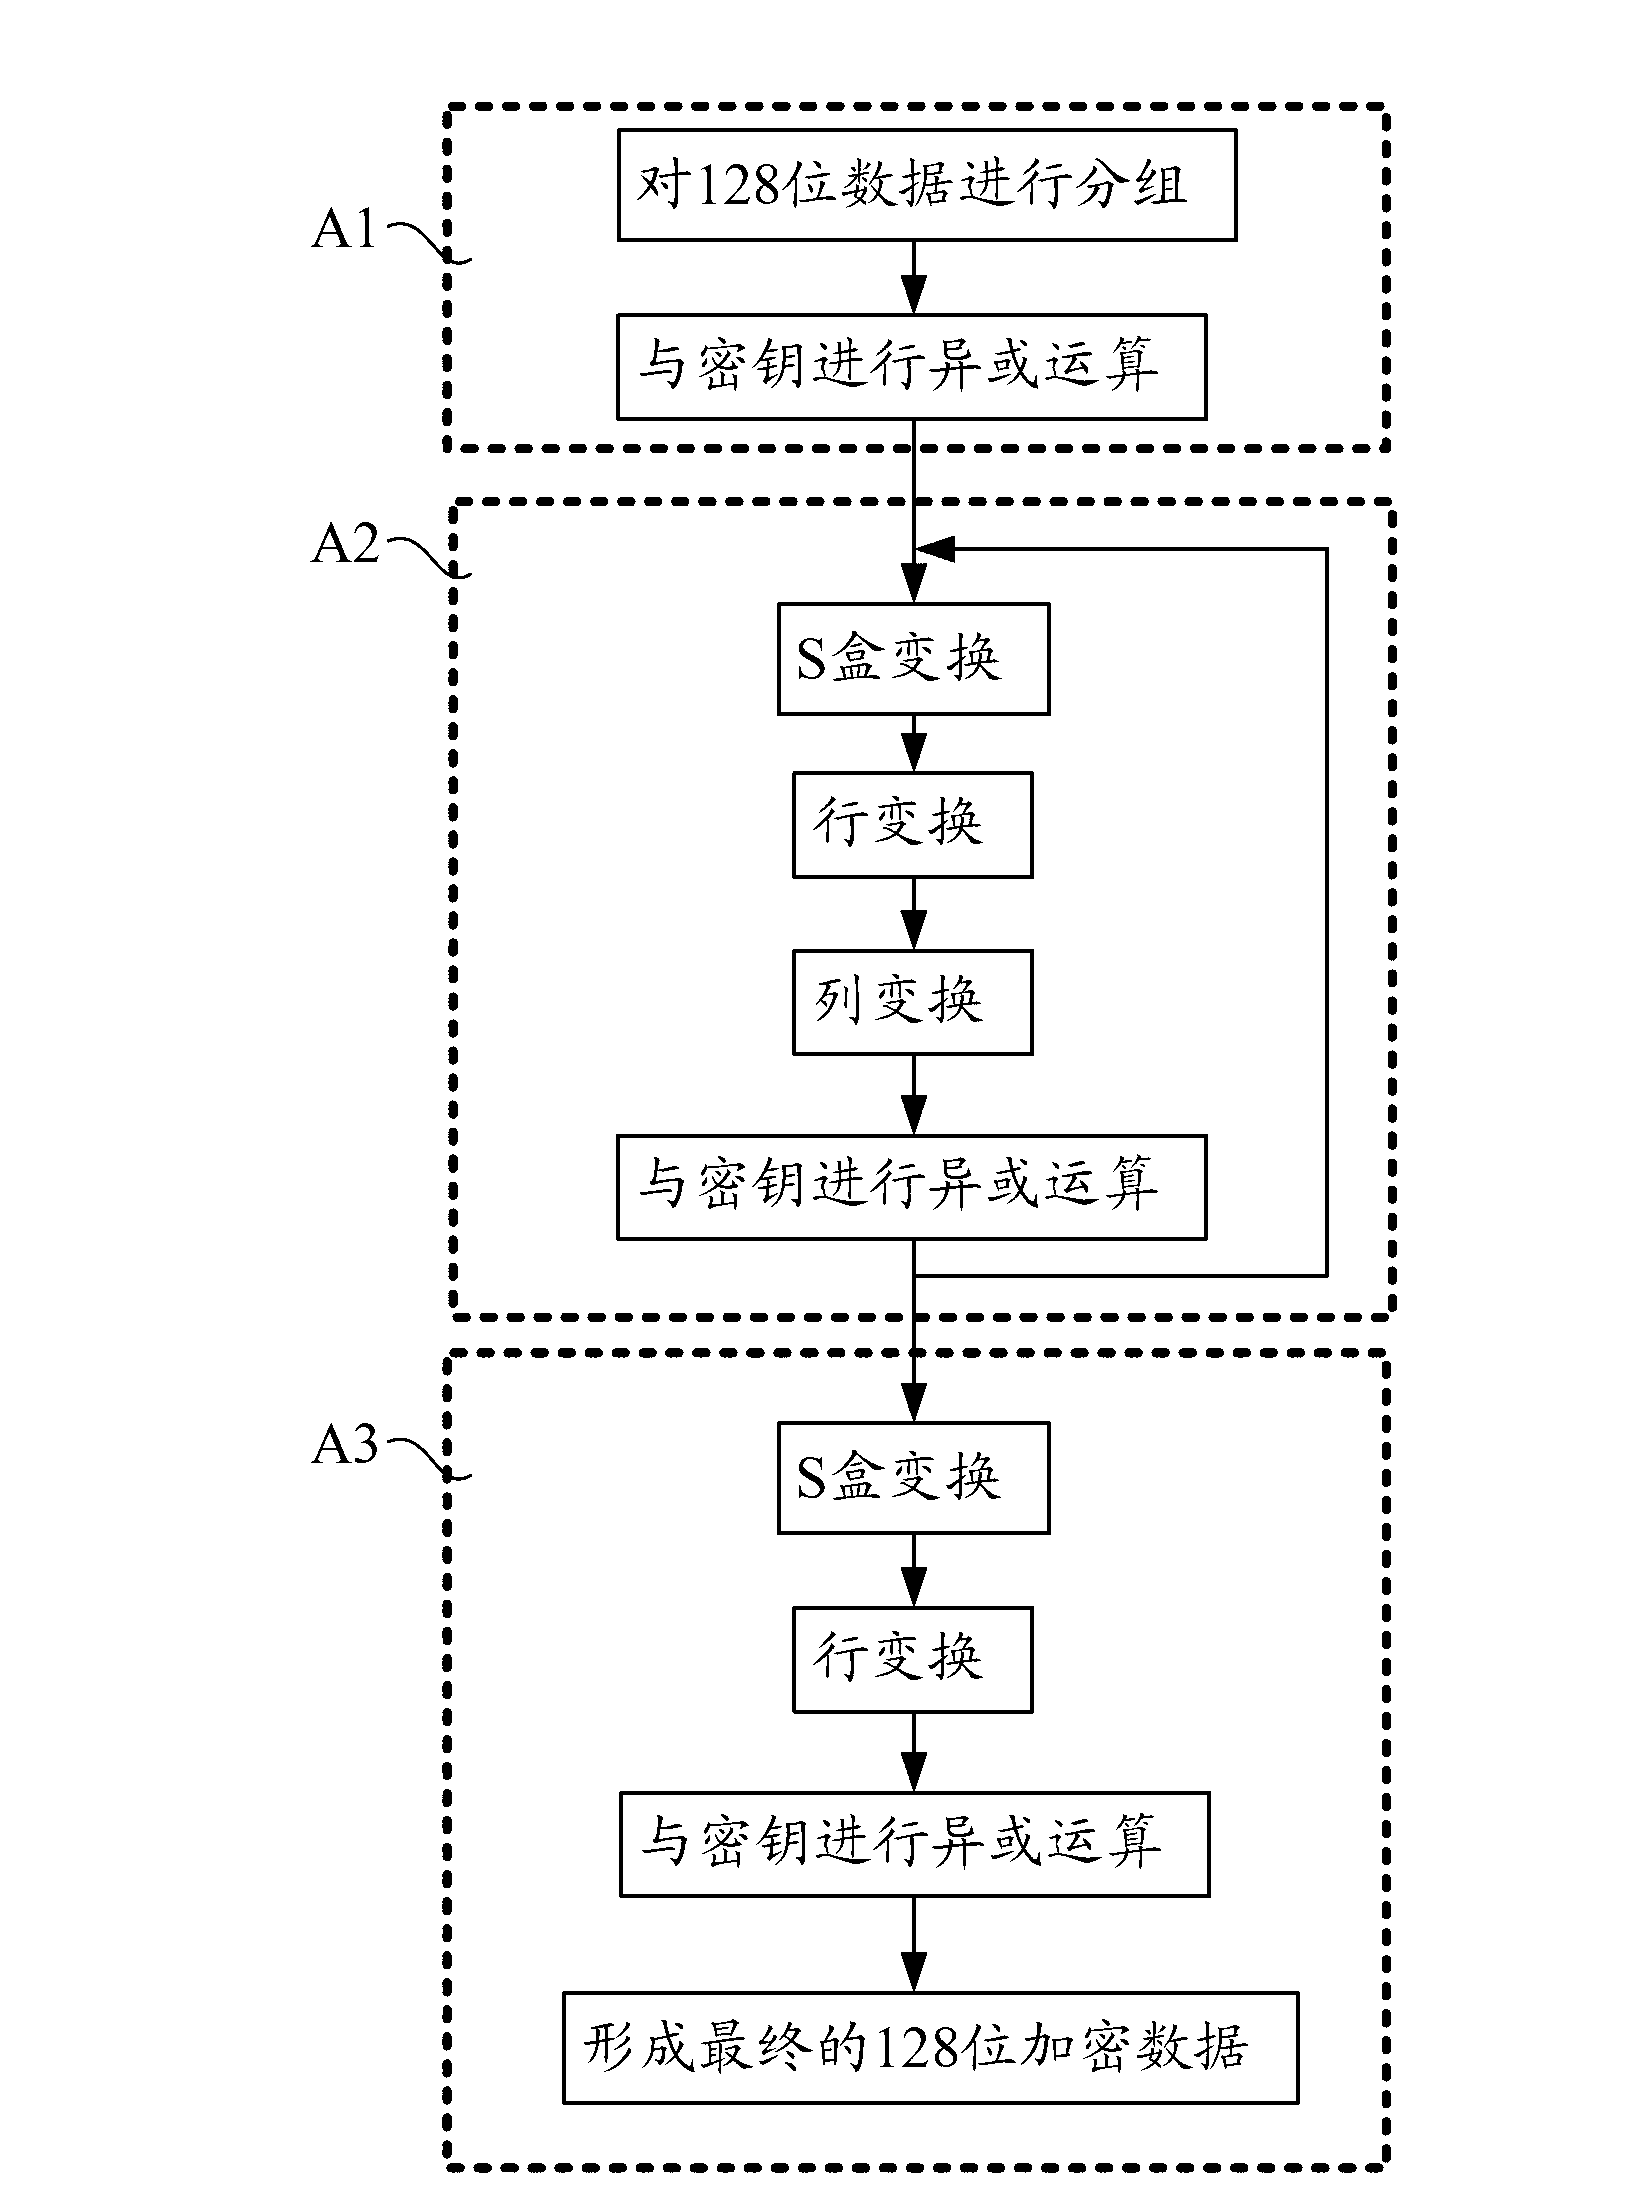 Communication system, remote-control method and remote-control equipment